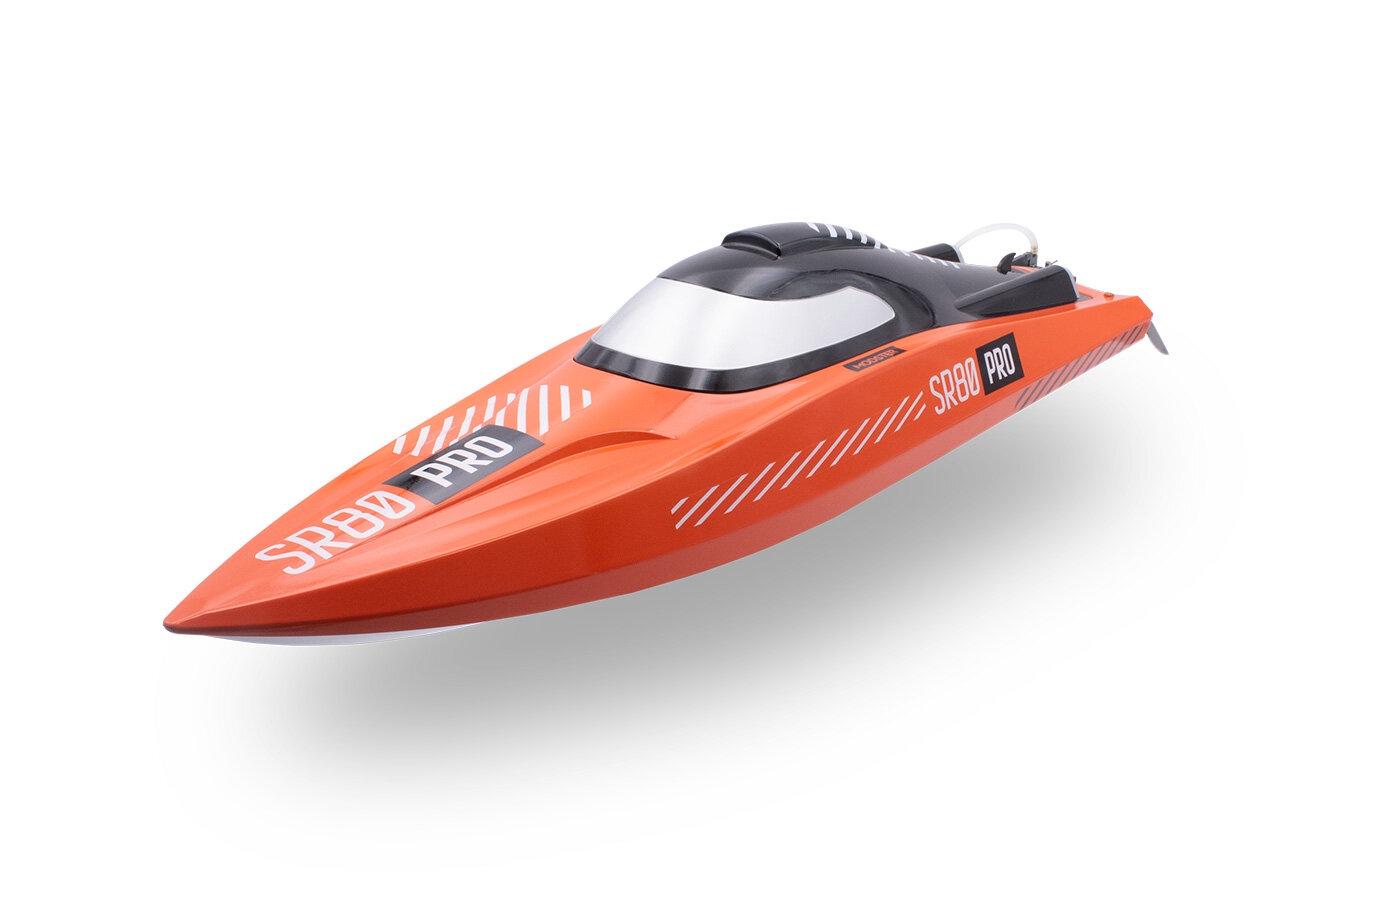 Remote Control Water Boat: Exciting RC Water Boat Competitions Around the World